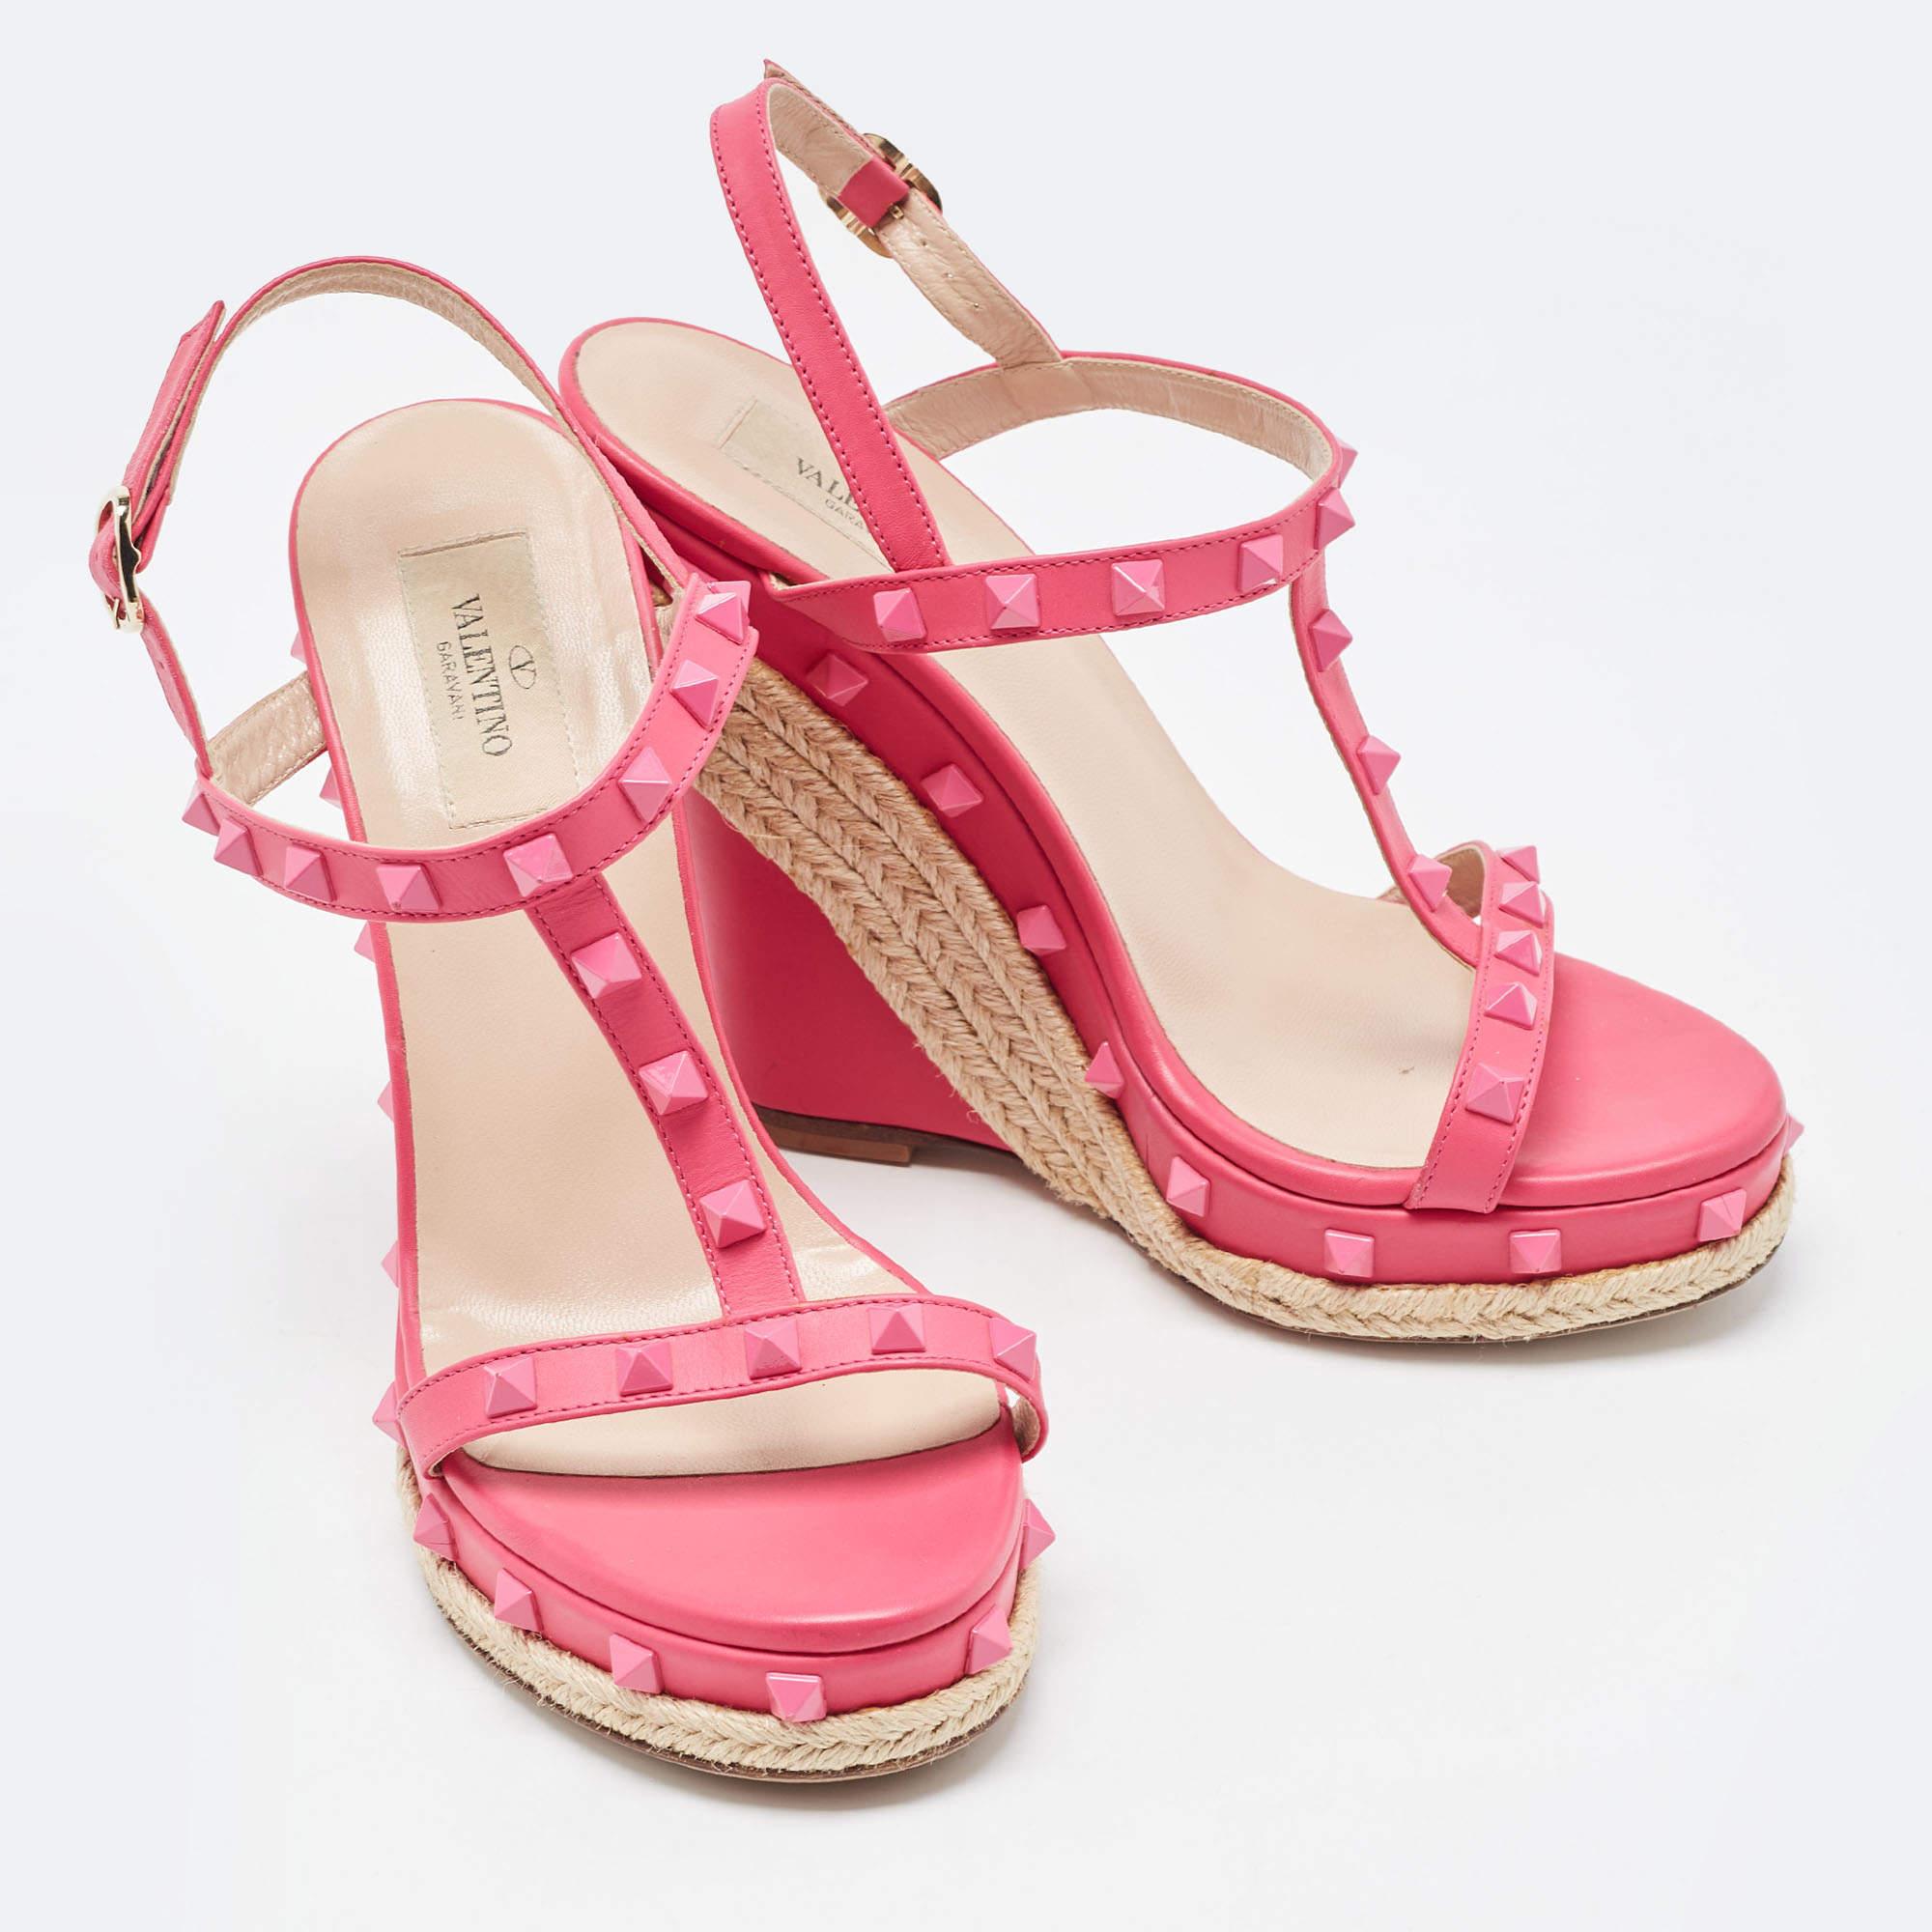 The house of Valentino brings forth a classy design with this pair of sandals. Designed with care using a cute shade of pink leather, these shoes can be paired with your ensembles for a look of stylish grace. The look of these T-strap sandals is